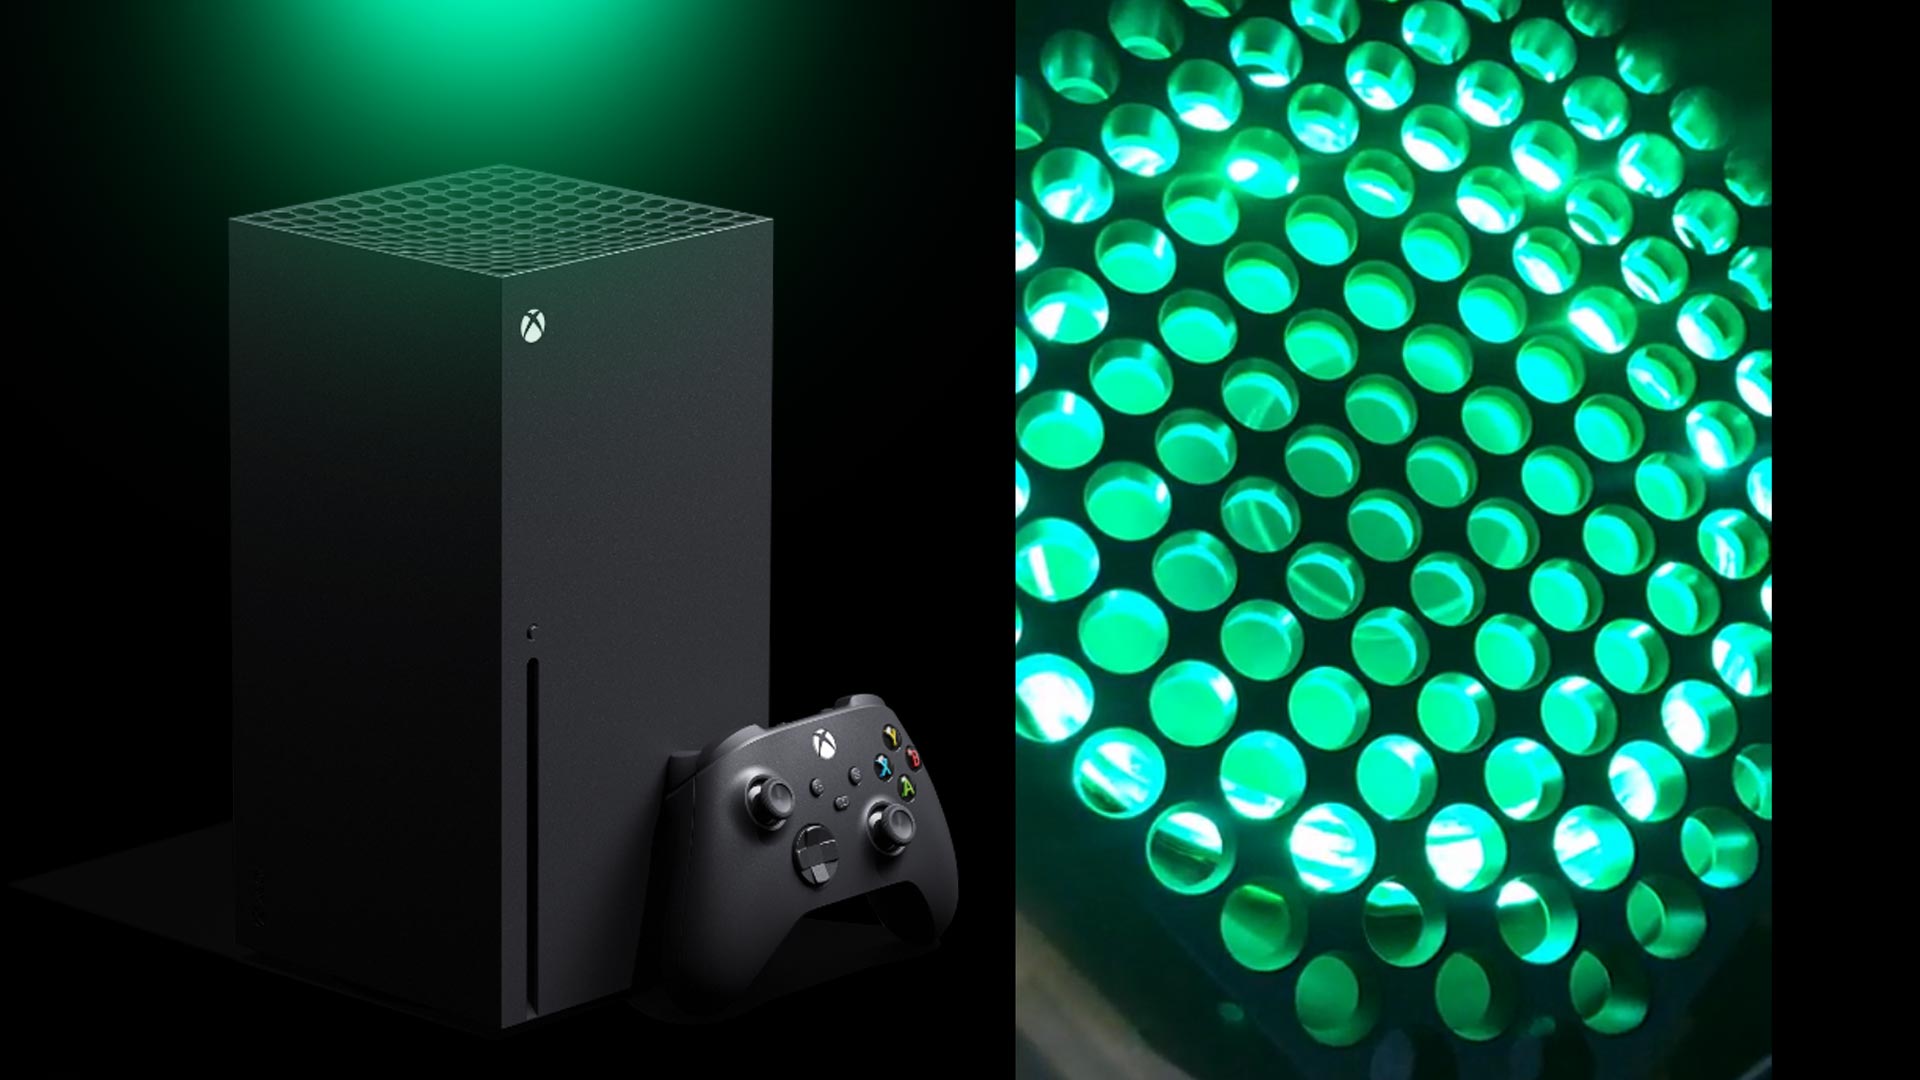 Xbox Series X MOD: Adding LEDs in its console breaks warranty |  Xbox One